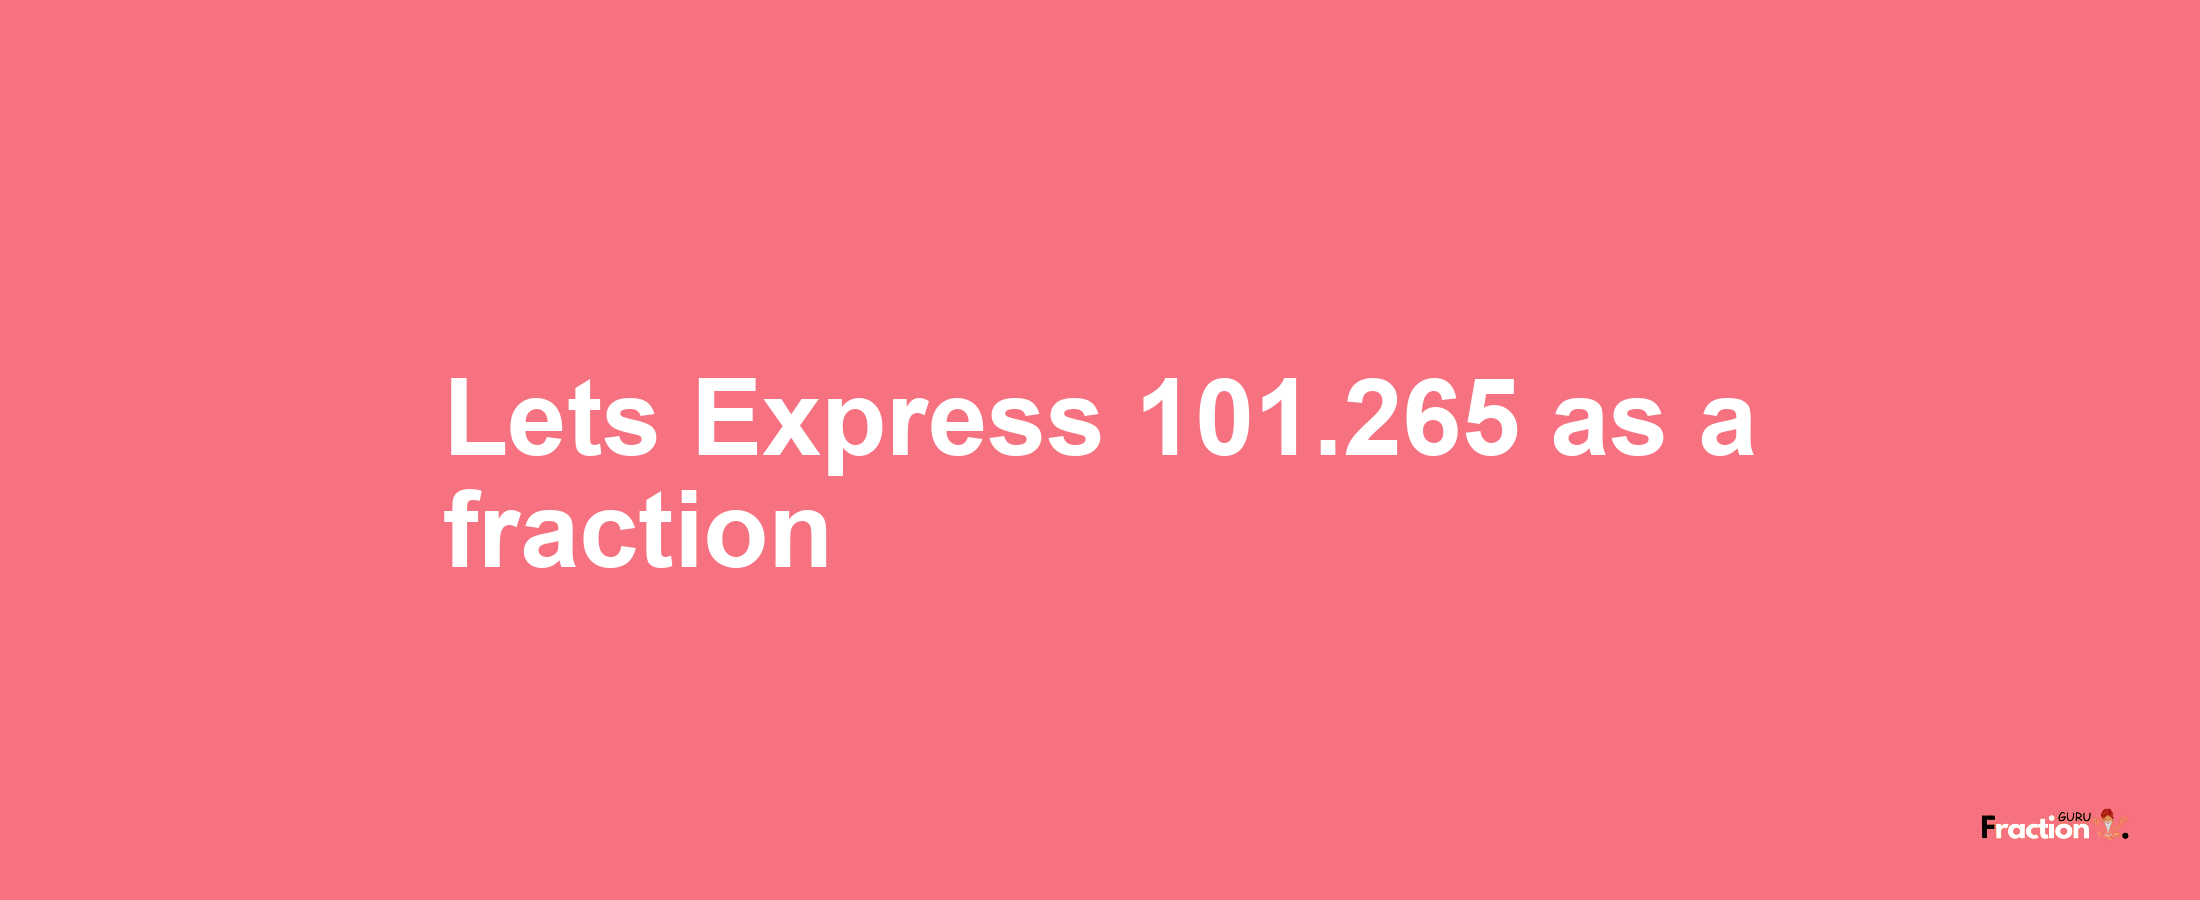 Lets Express 101.265 as afraction